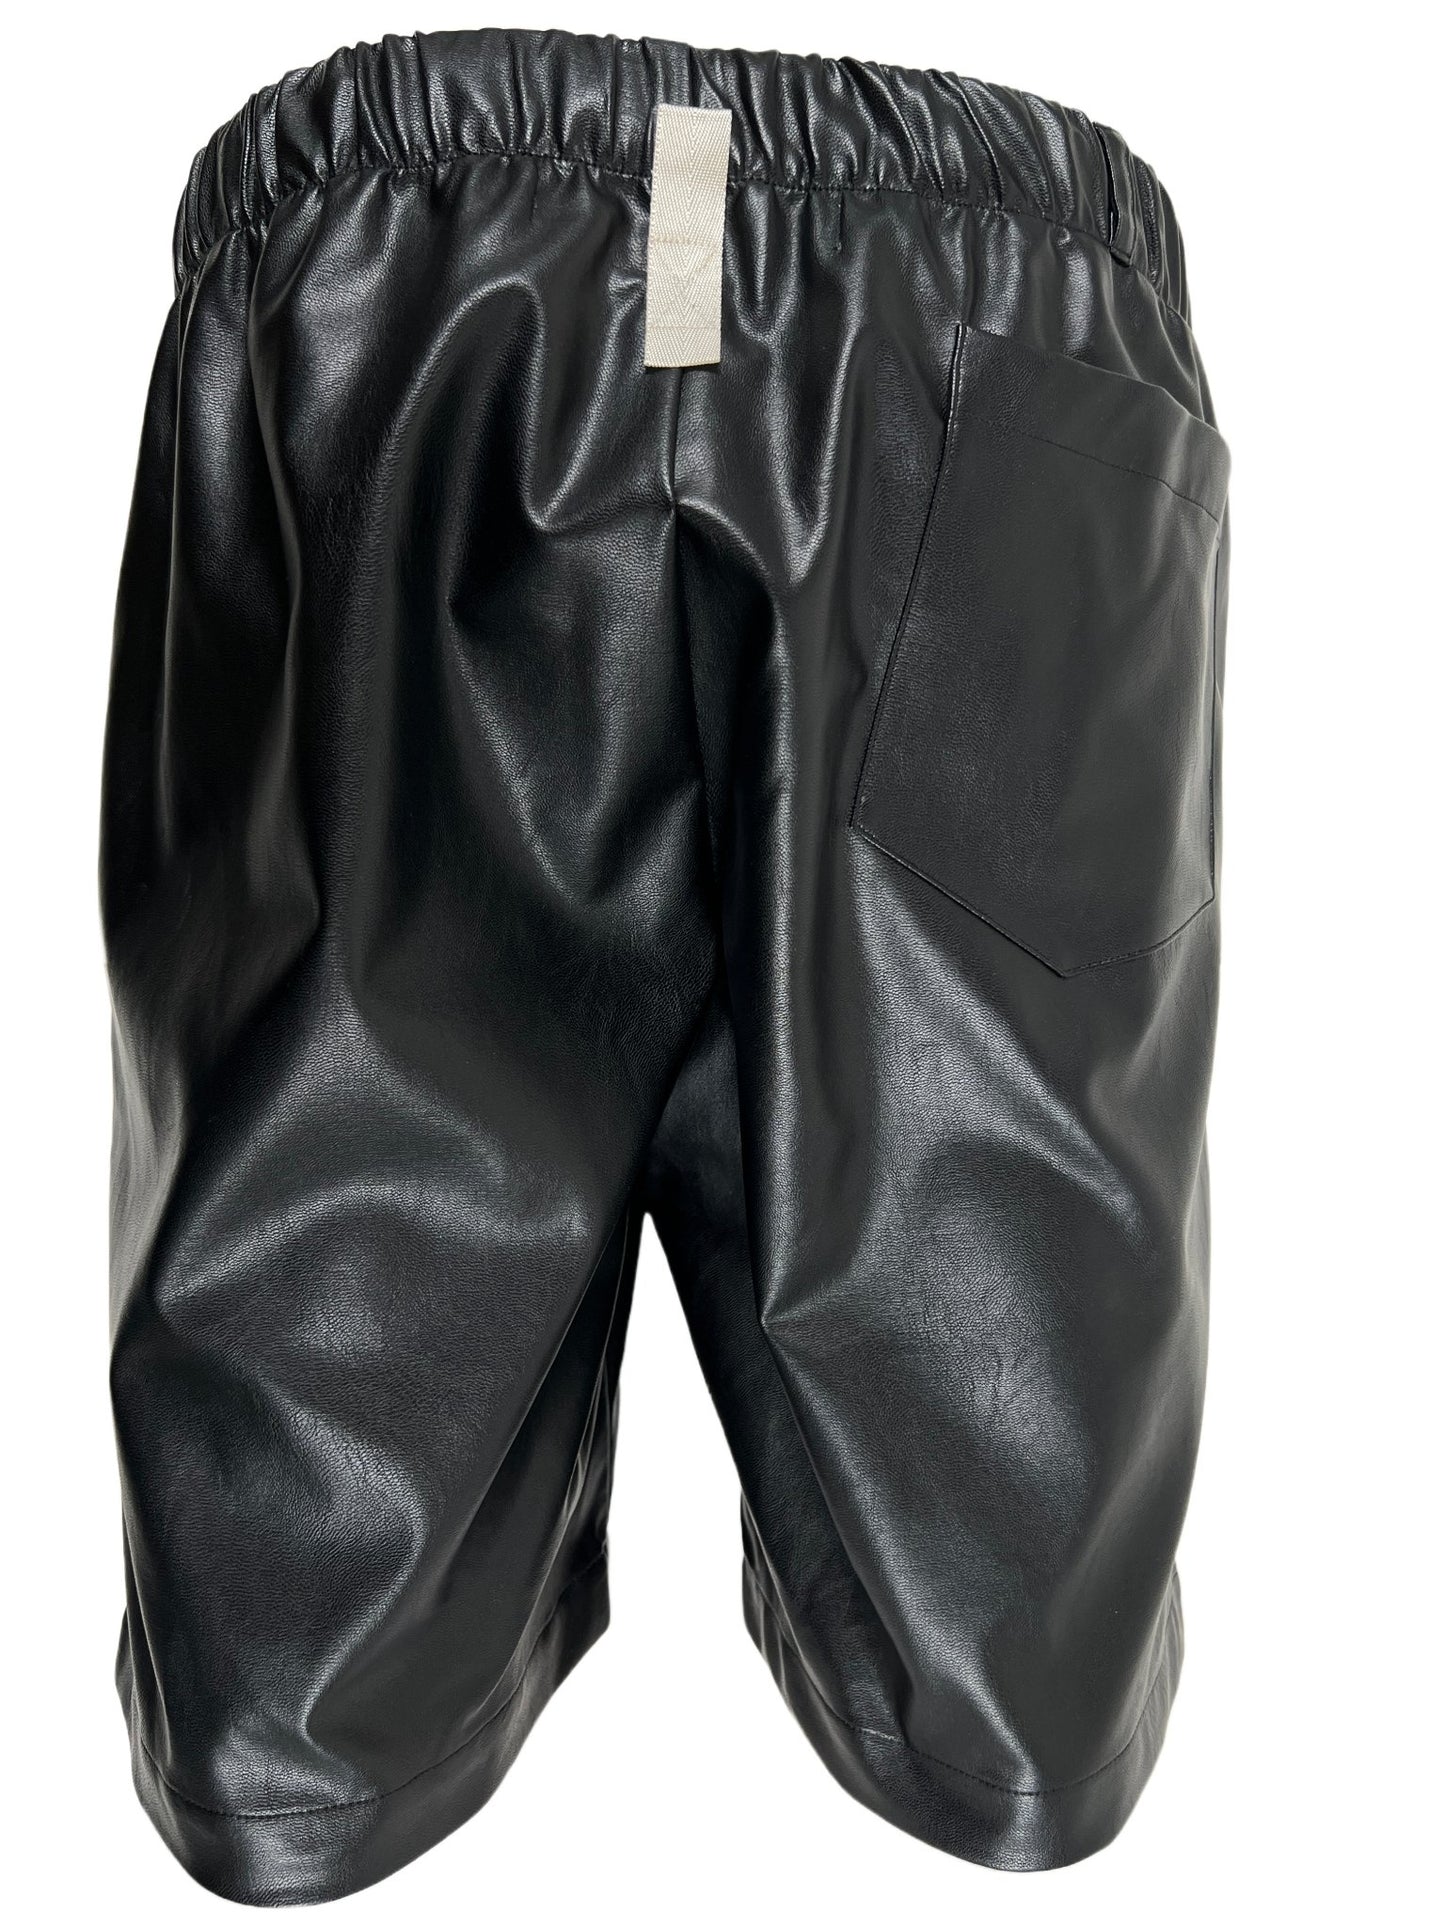 A black ADVISORY BOARD CRYSTALS polyester basketball shorts on a white background.